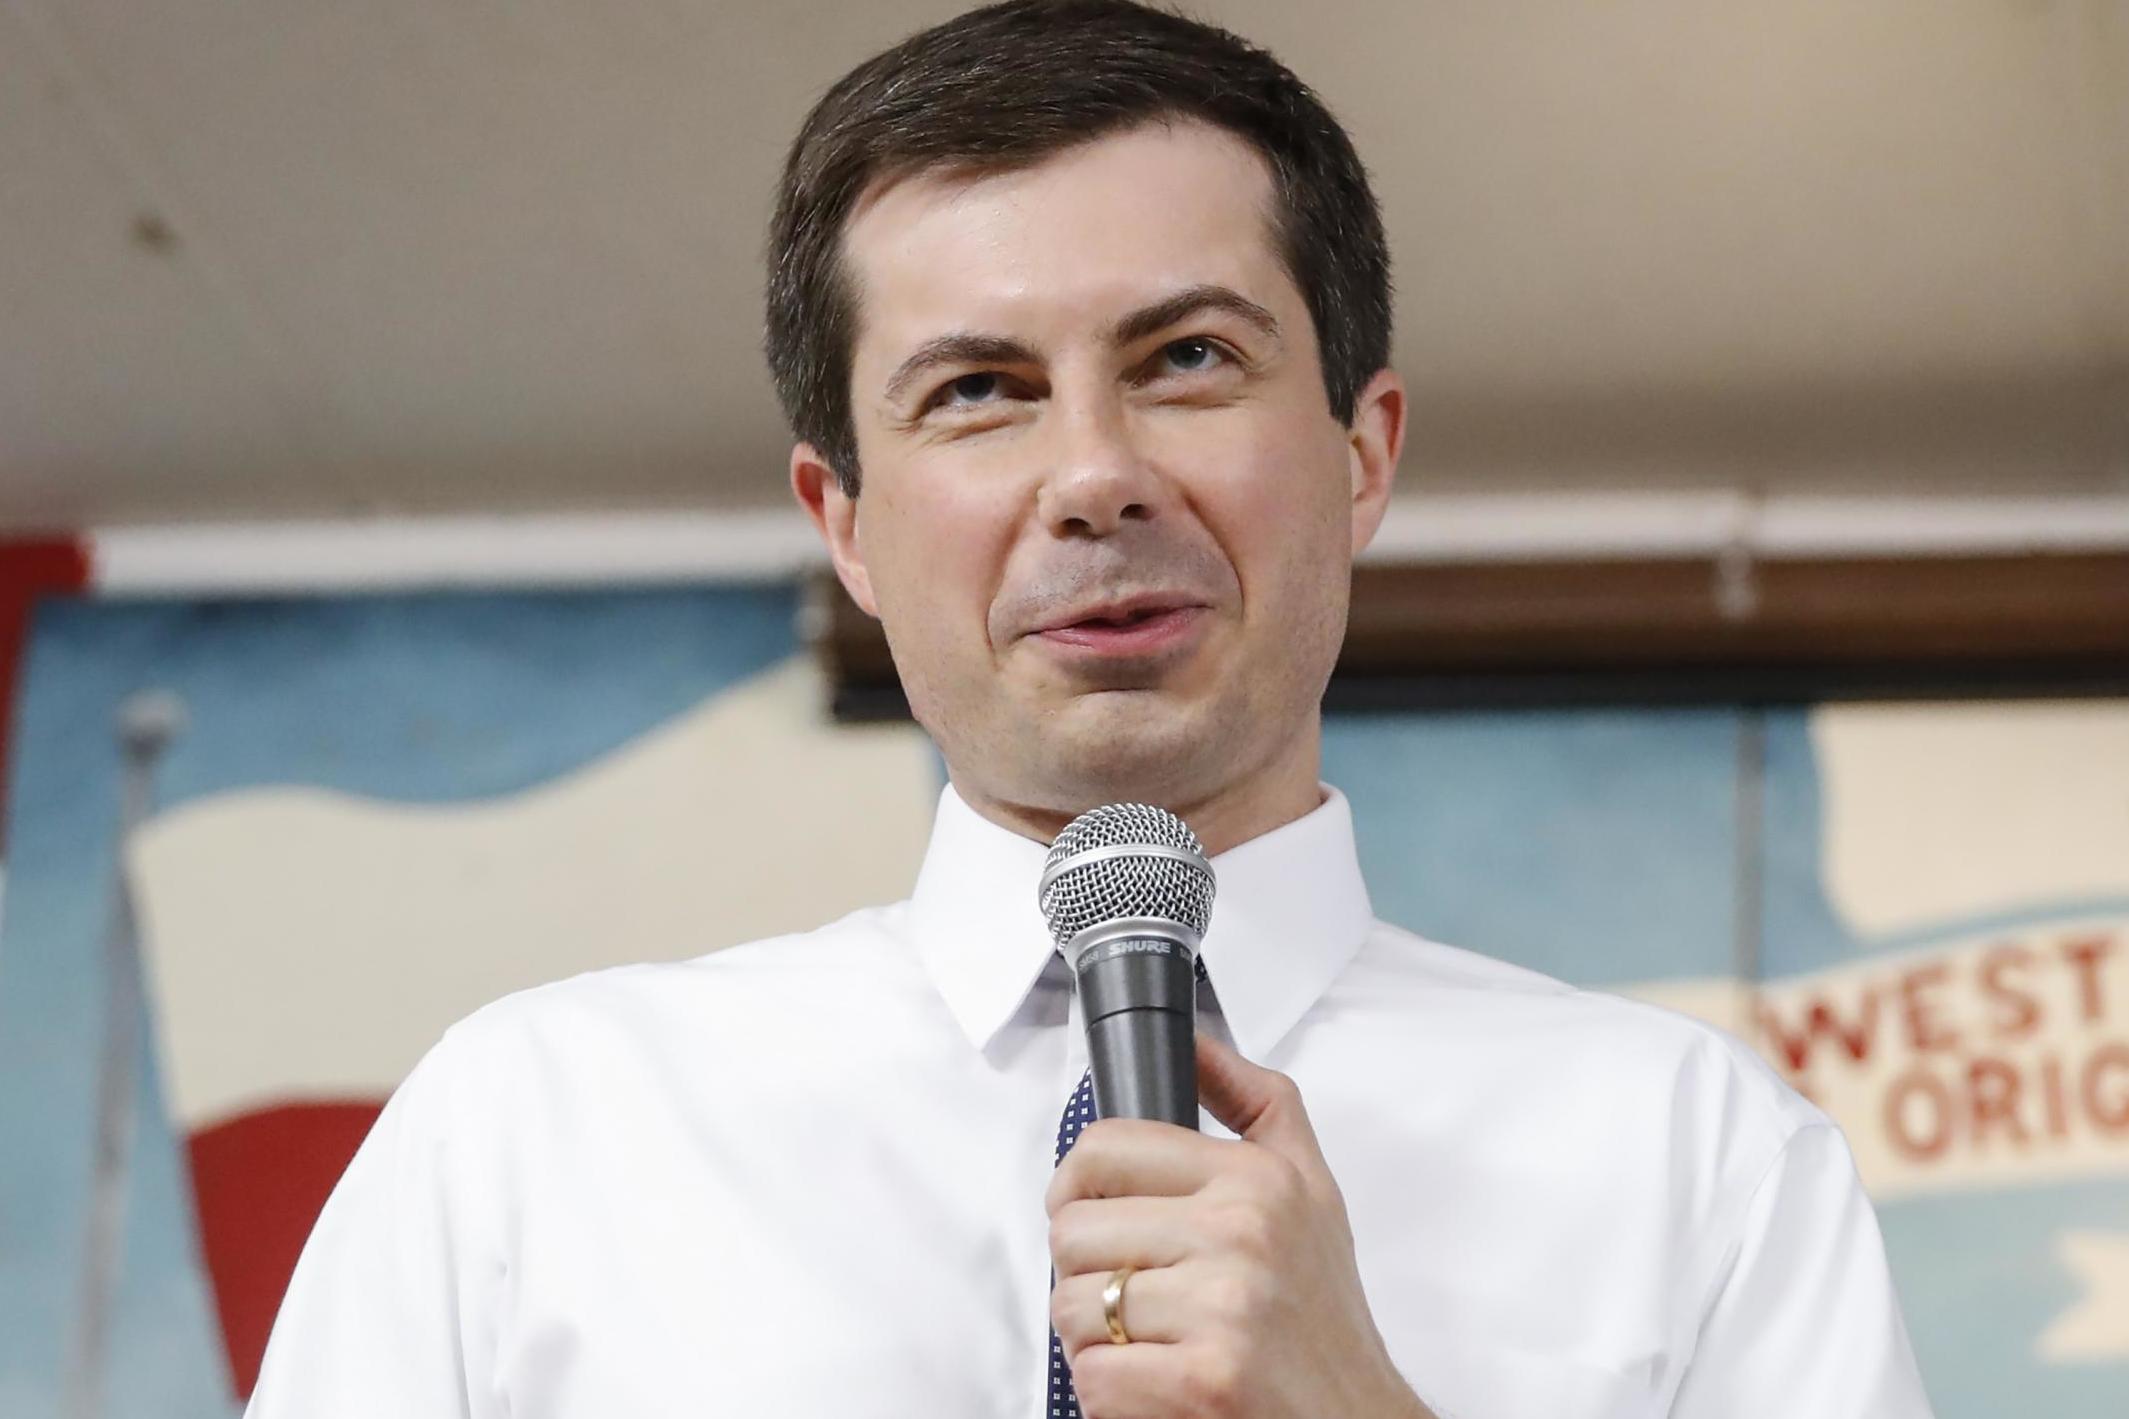 South Bend Mayor and Democratic presidential candidate Pete Buttigieg.